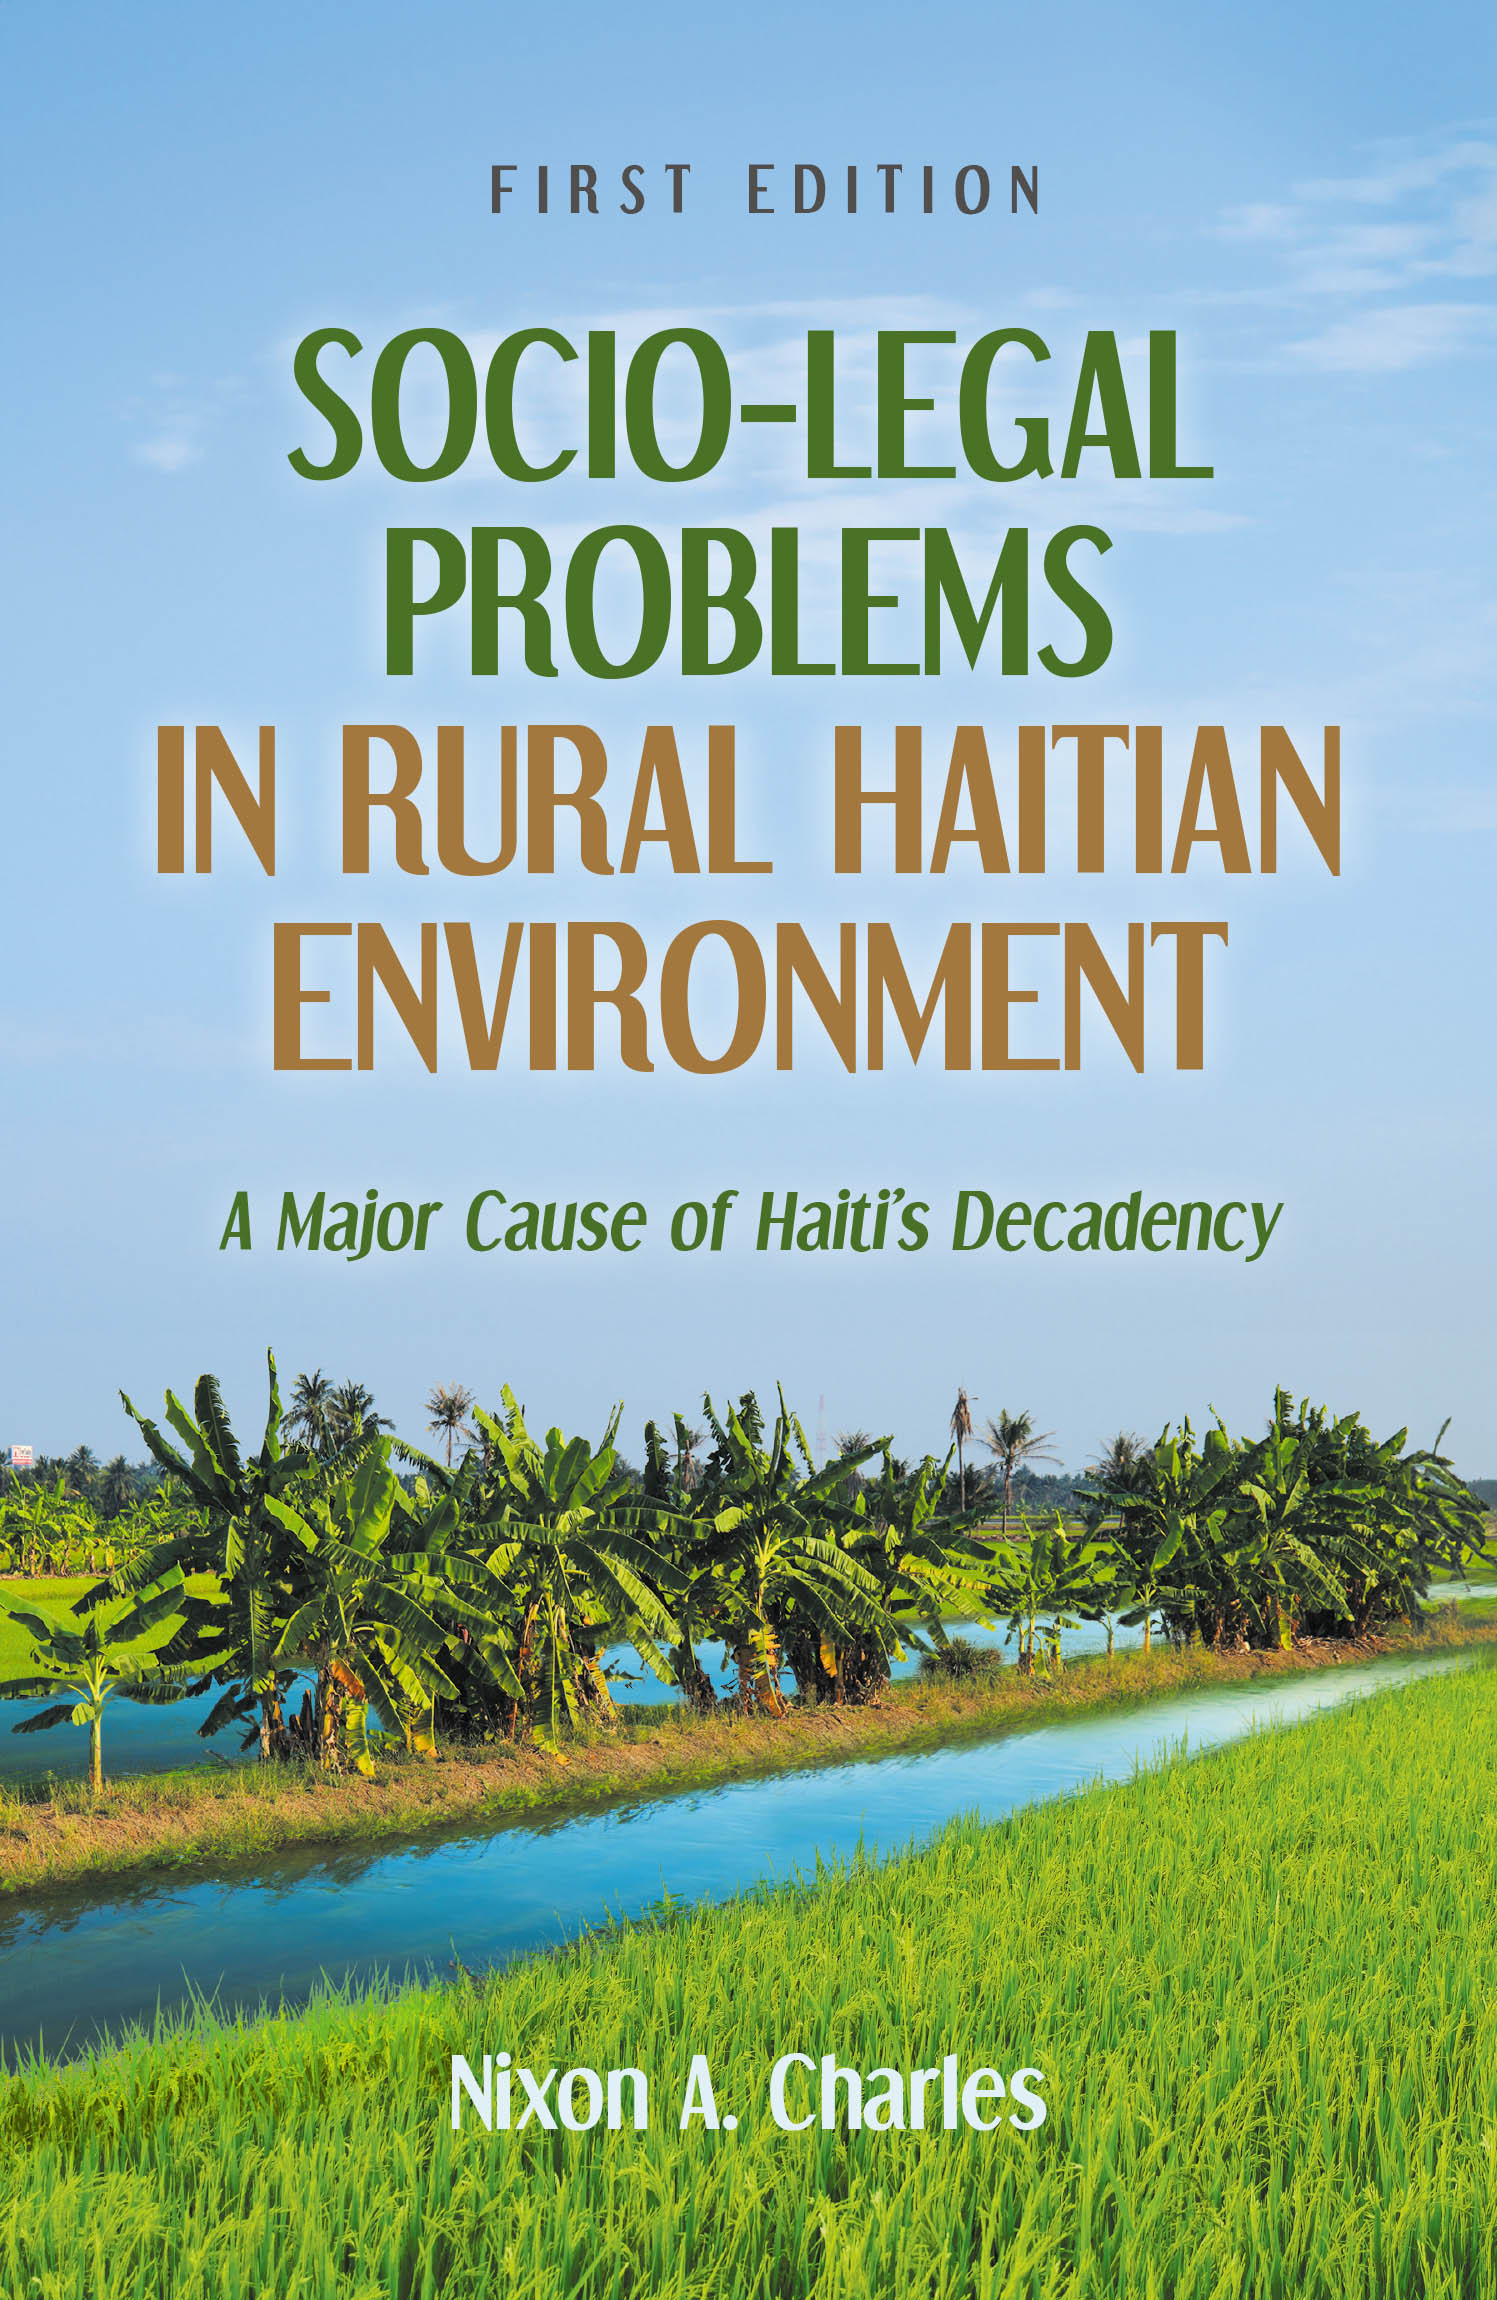 Author Nixon A. Charles’s New Book, "Socio-Legal Problems in Rural Haitian Environment: A Major Cause of Haiti's Decadency," Explores the Ongoing Issues in Rural Haiti